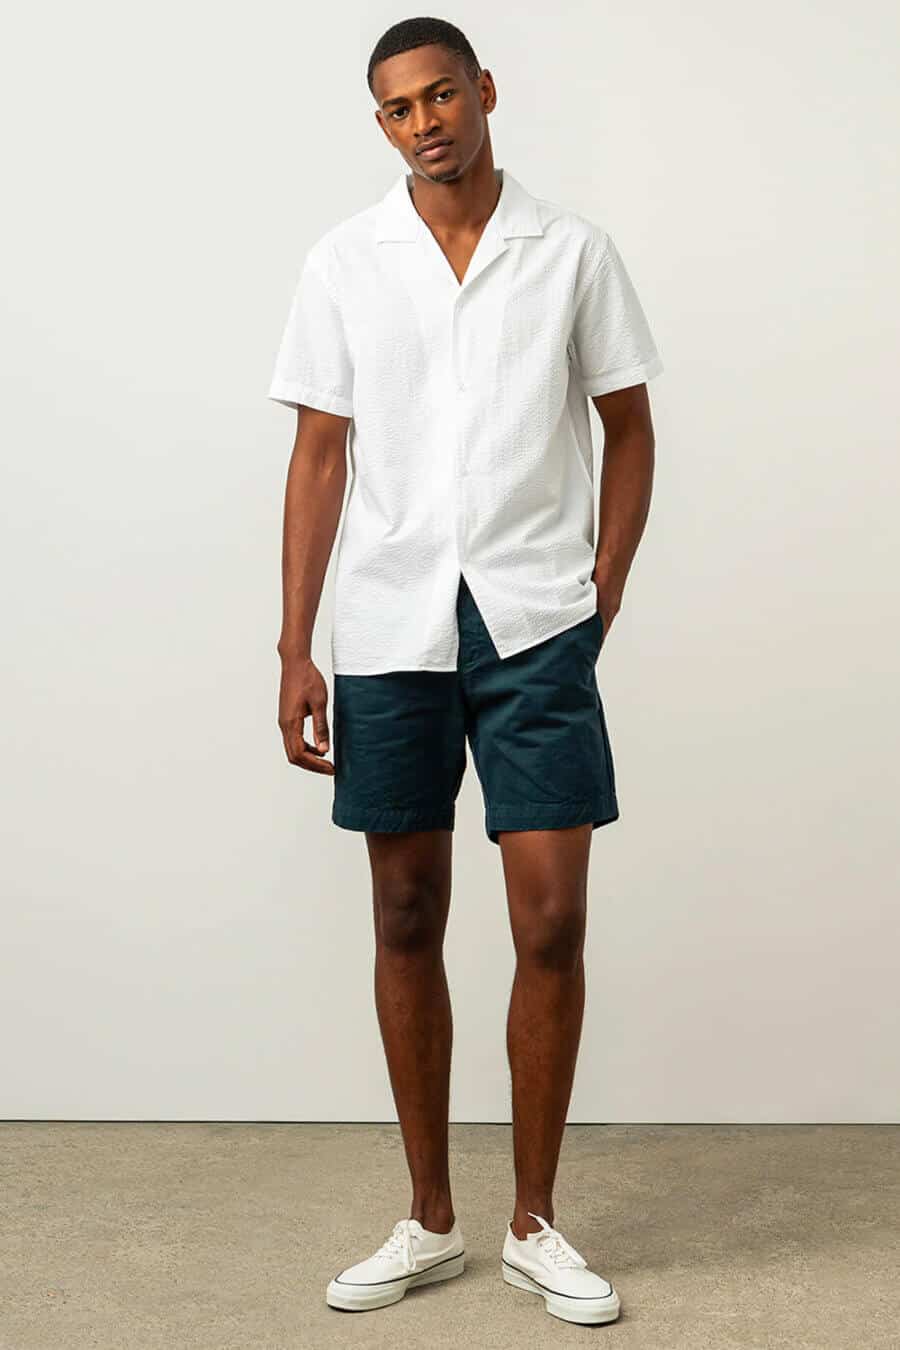 Mens outfits with shorts, creating stylish and versatile men's outfits with shorts can elevate your wardrobe